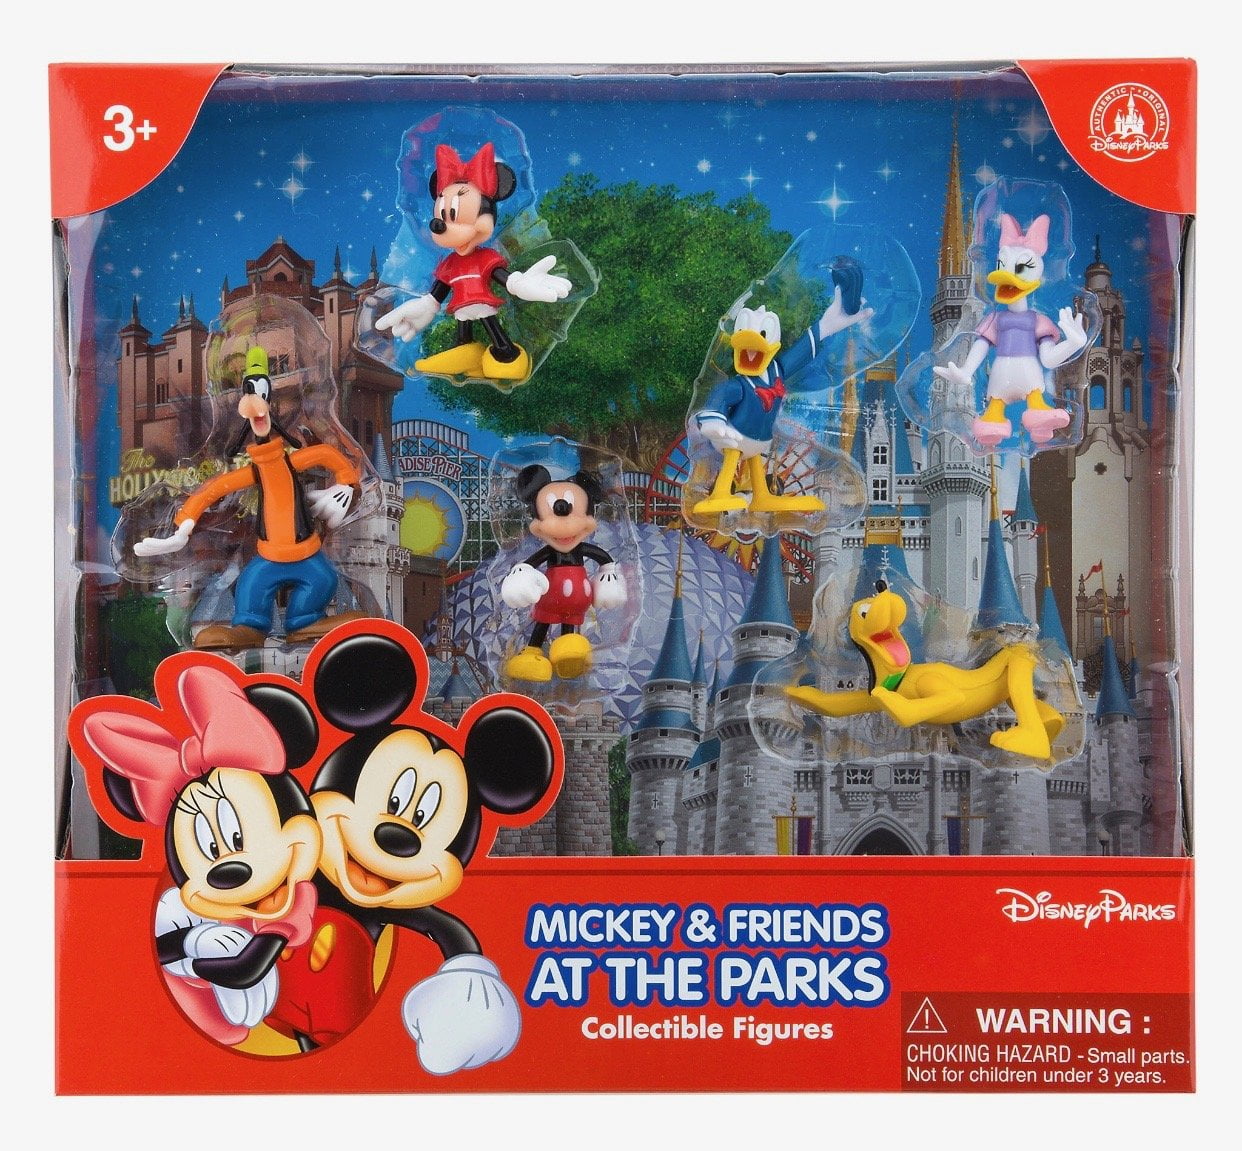 Birthday Party Supplies Cupcake Figures Party Cake Topper Mickey Action Figures for Kid 5PCS Disney Cake Topper Birthday Cake Decoration of Mickey Mouse Donald Duck Mickey Mini Figures Set 